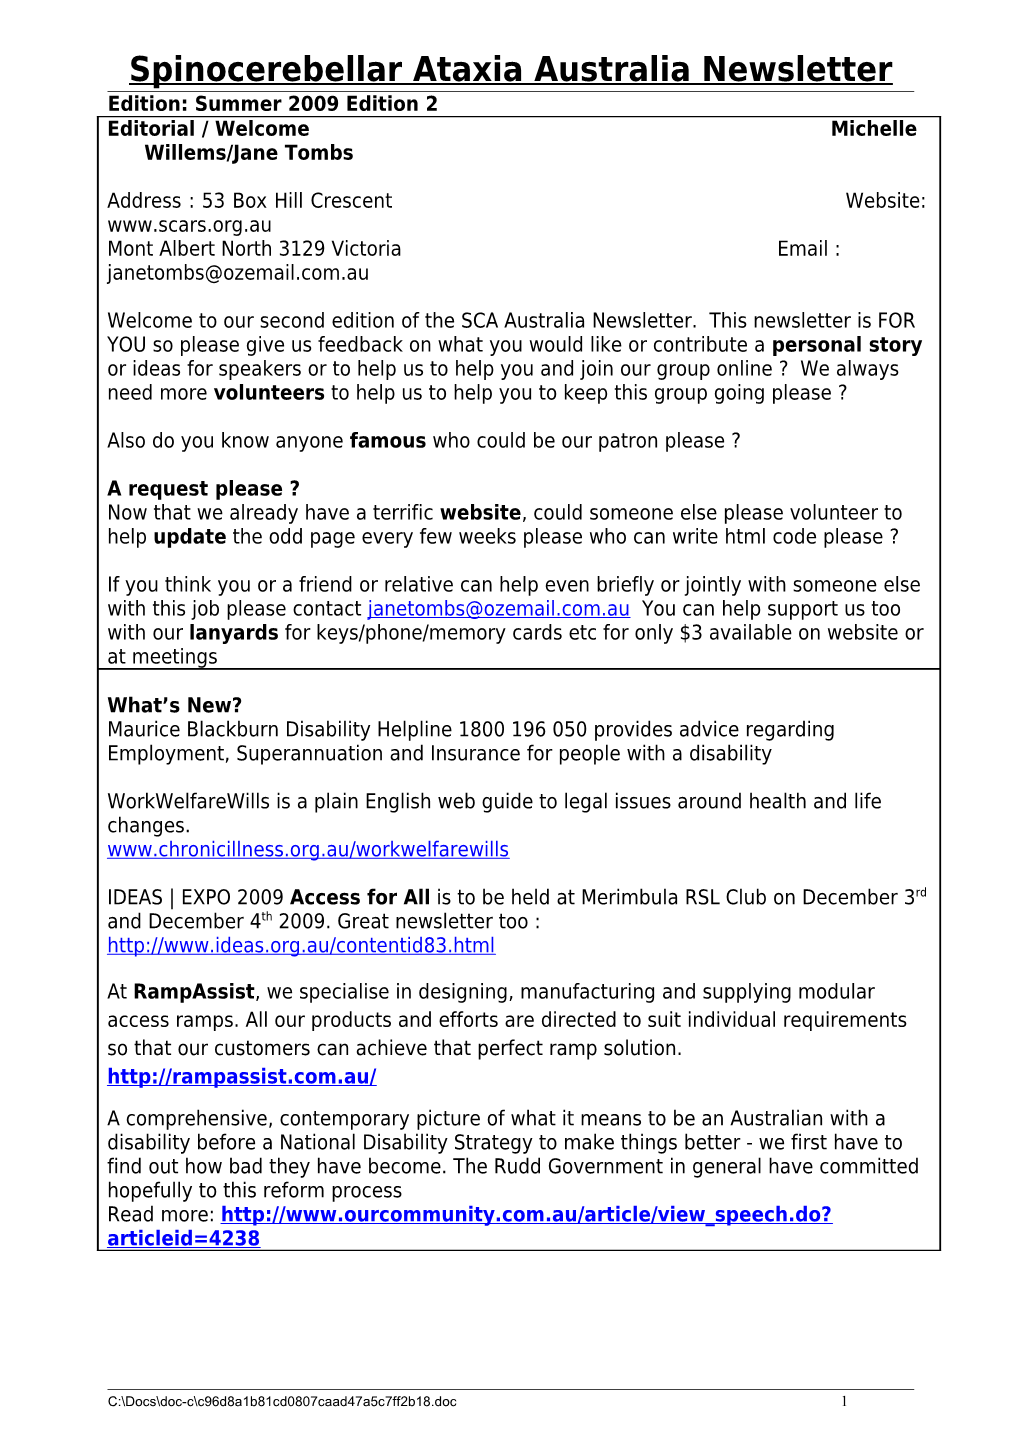 Accesscare Southern Newsletter Content Work Sheet